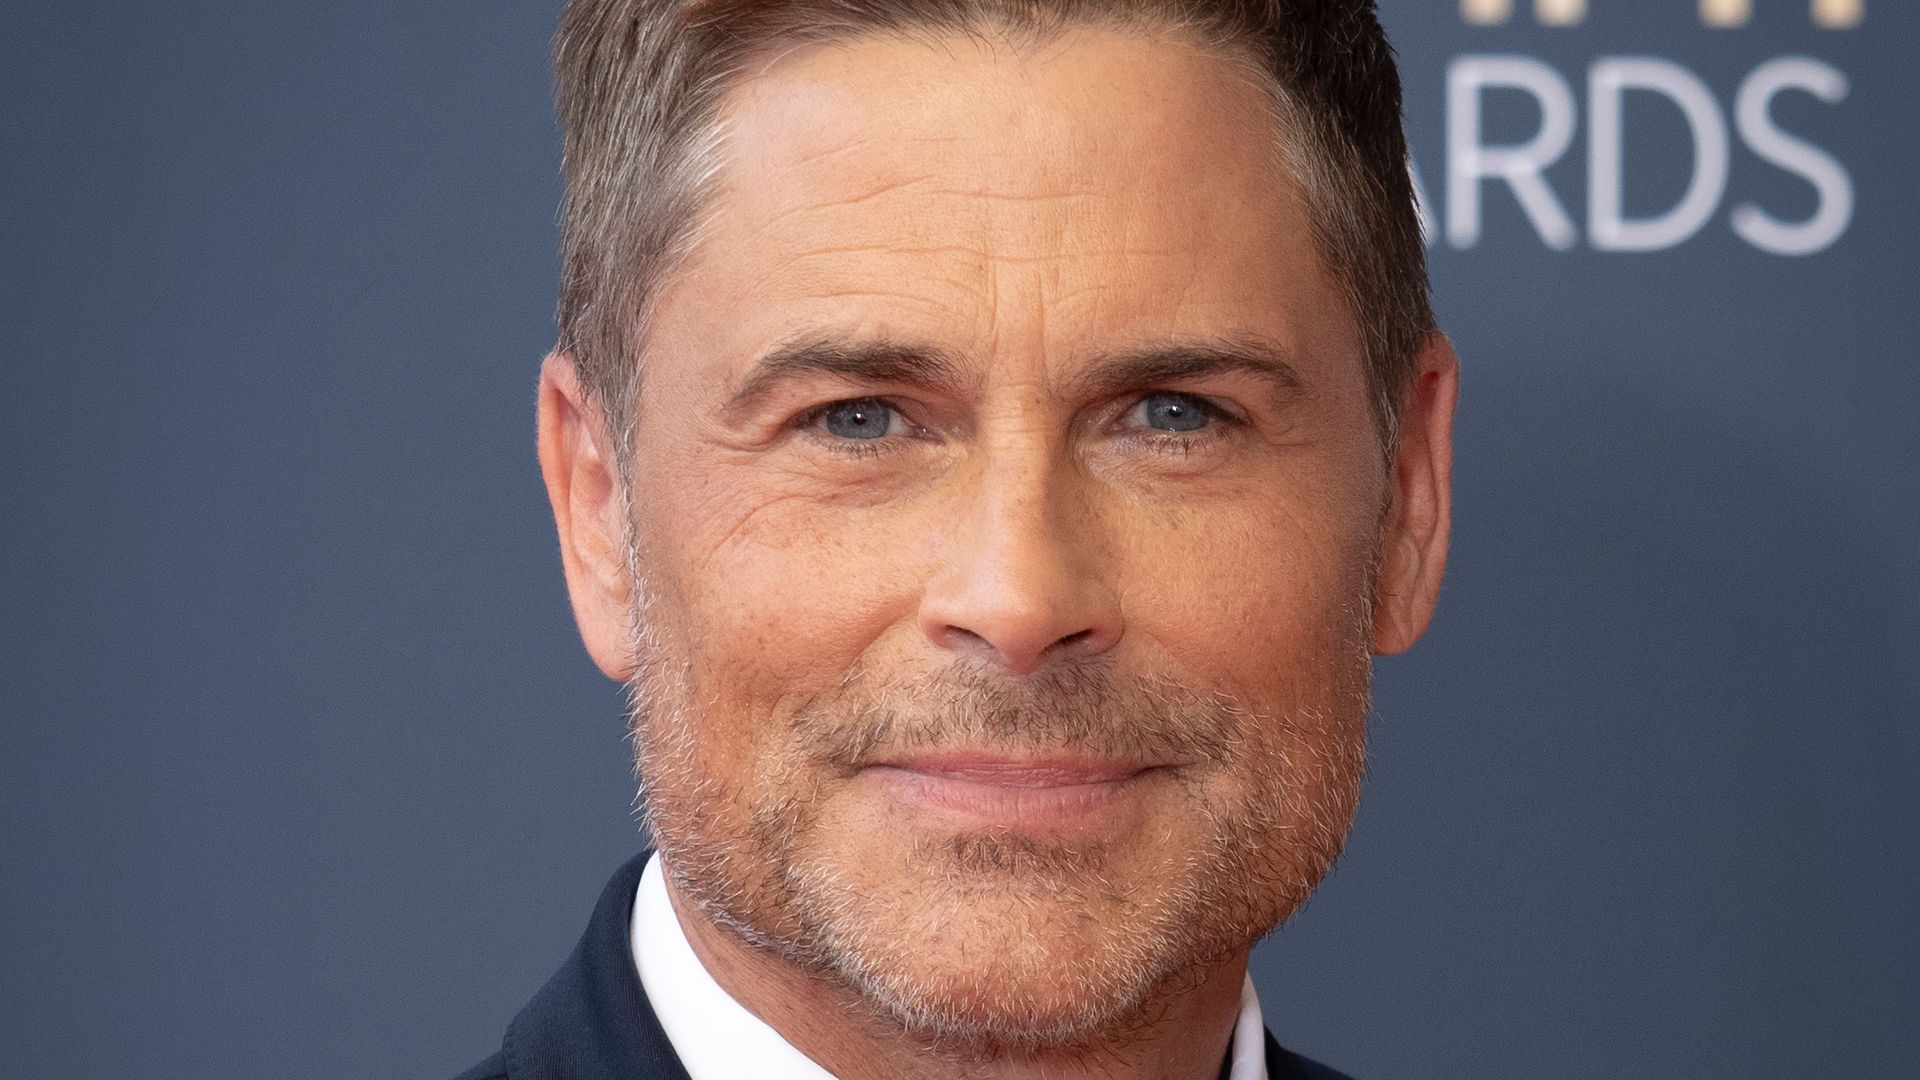 Rob Lowe handsome suit